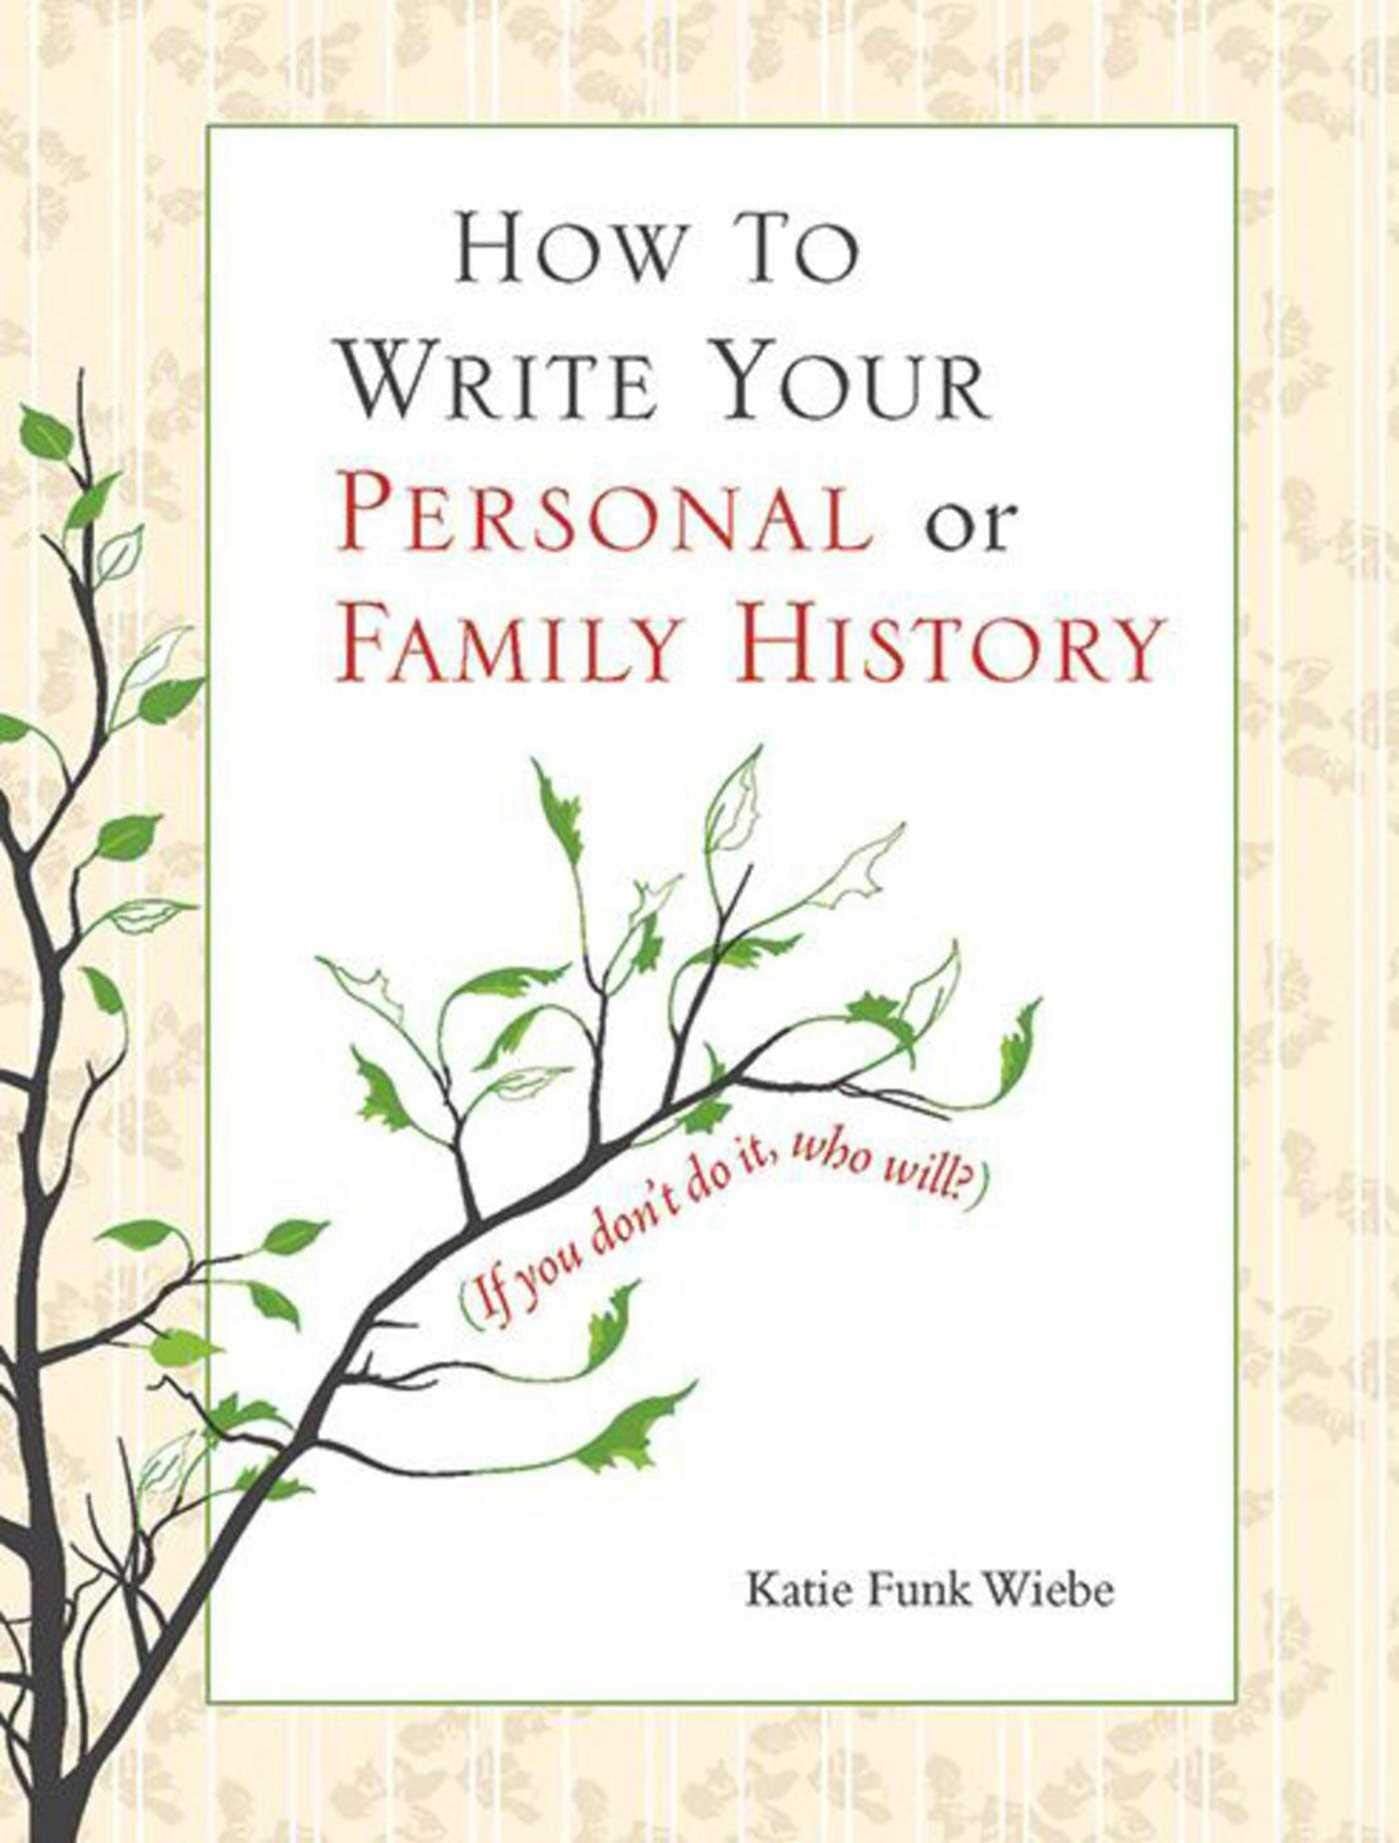 How to Write Your Personal or Family History SureShot Books